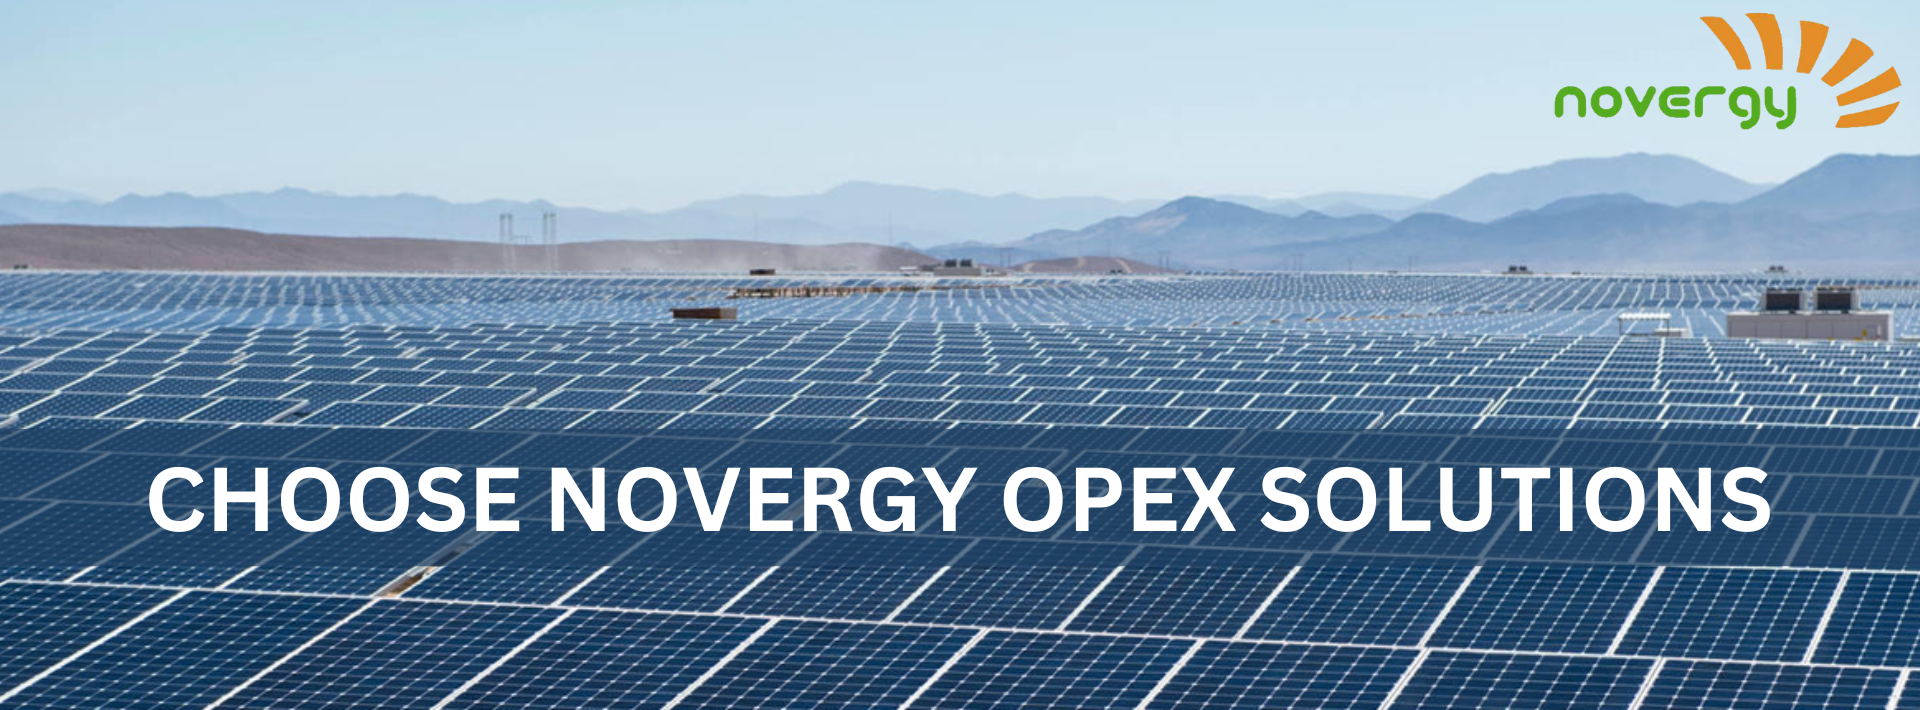 CHOOSE NOVERGY OPEX SOLUTIONS